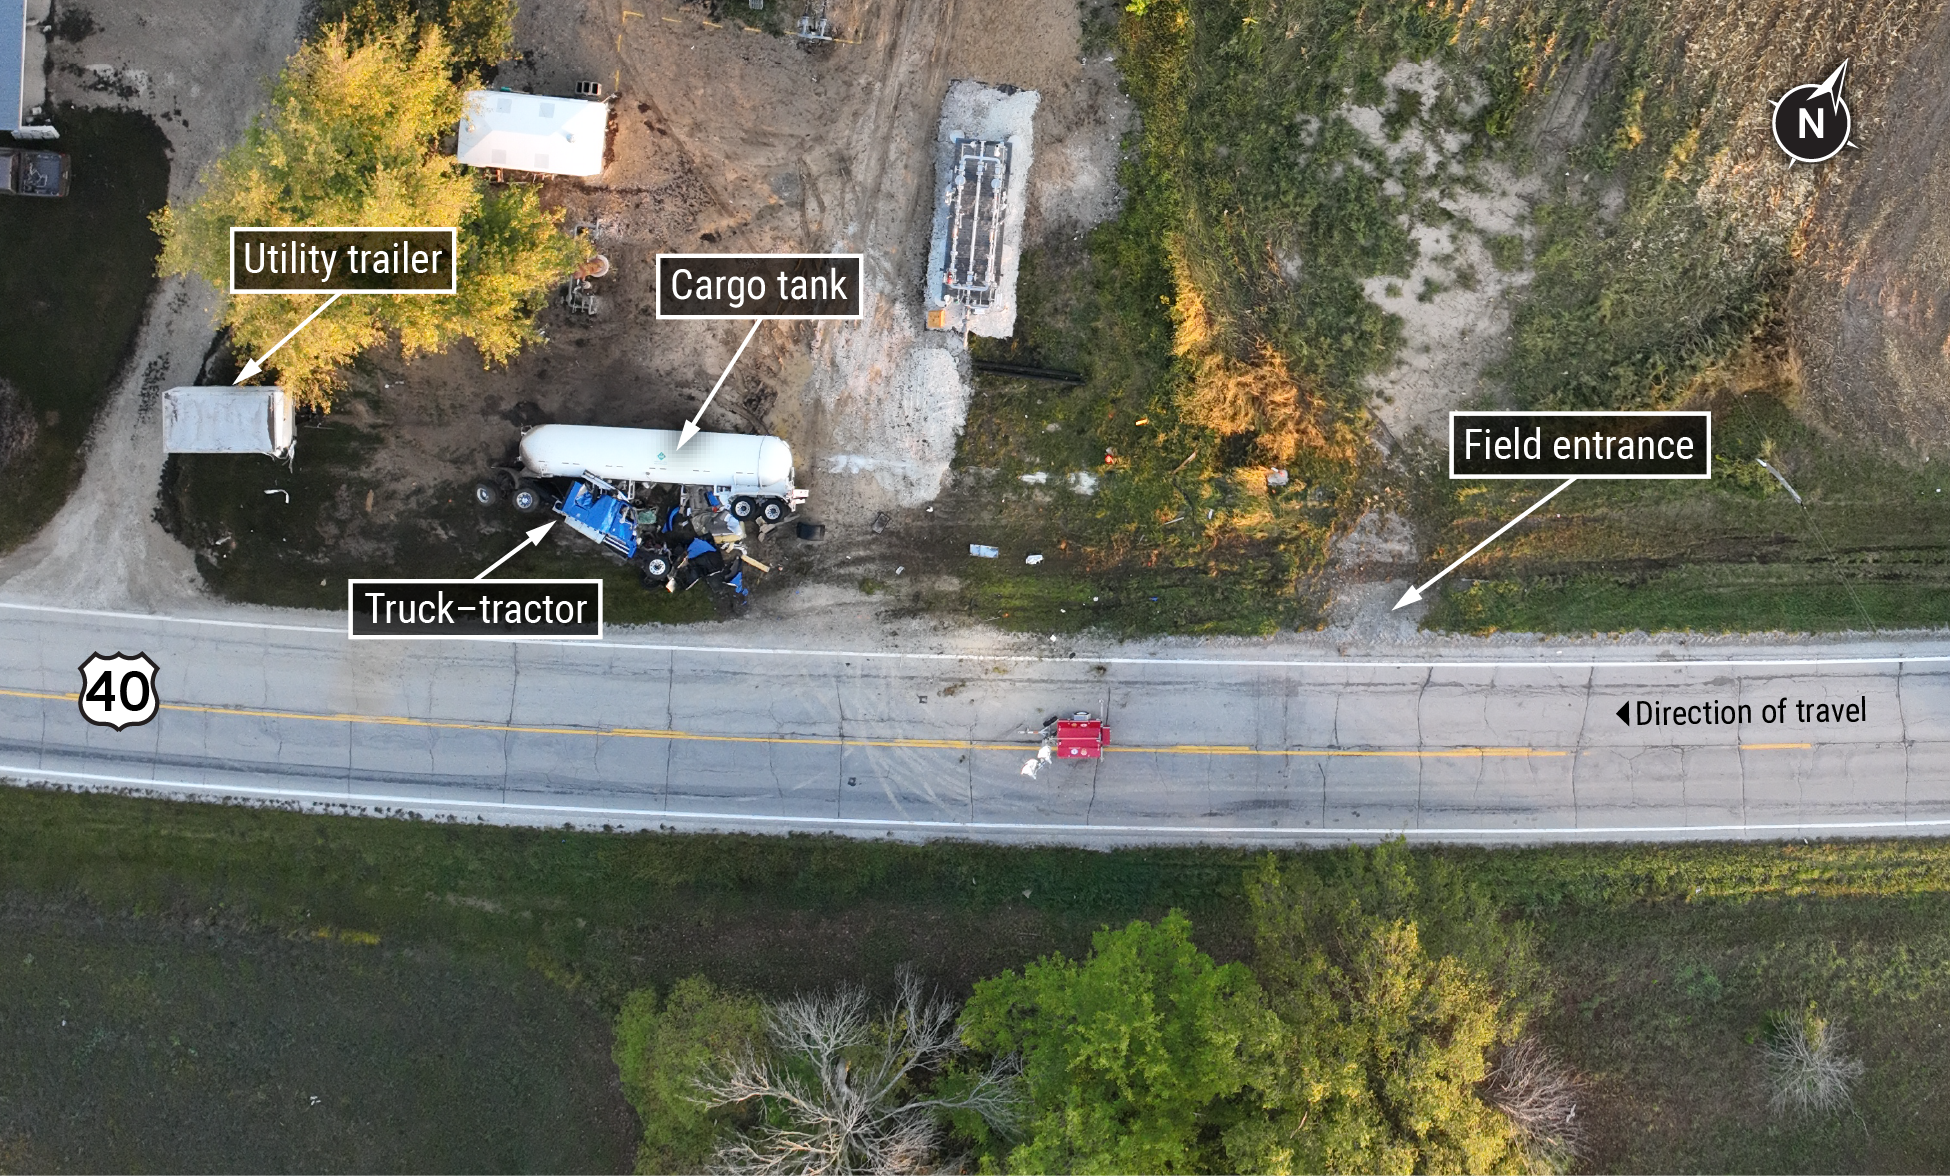 Aerial image of crash scene showing final rest positions of truck-tractor cargo tank semitrailer combination and utility trailer